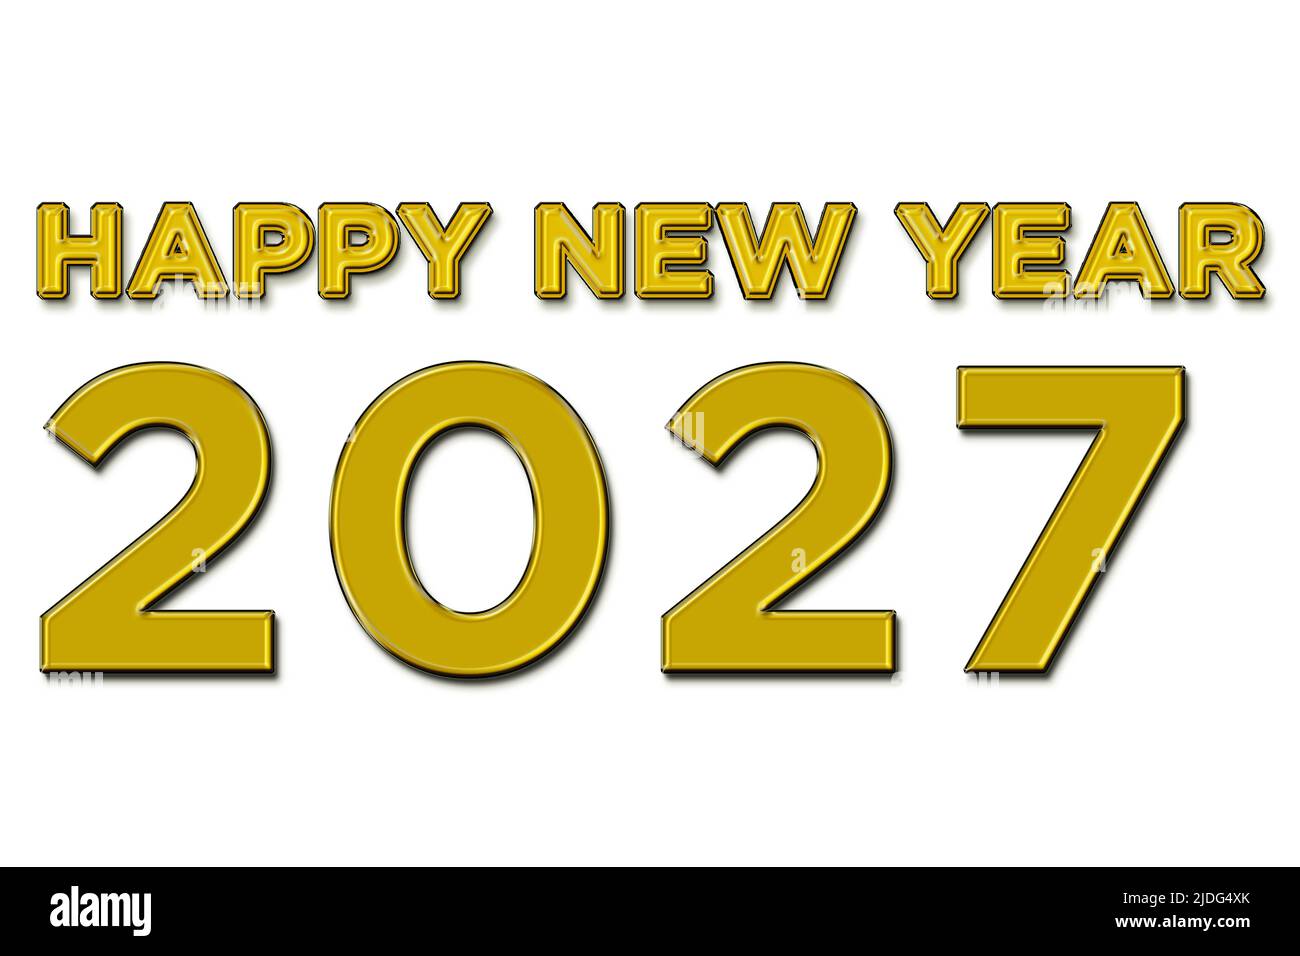 Happy new year 2027 illustration in yellow color text on white background Stock Photo